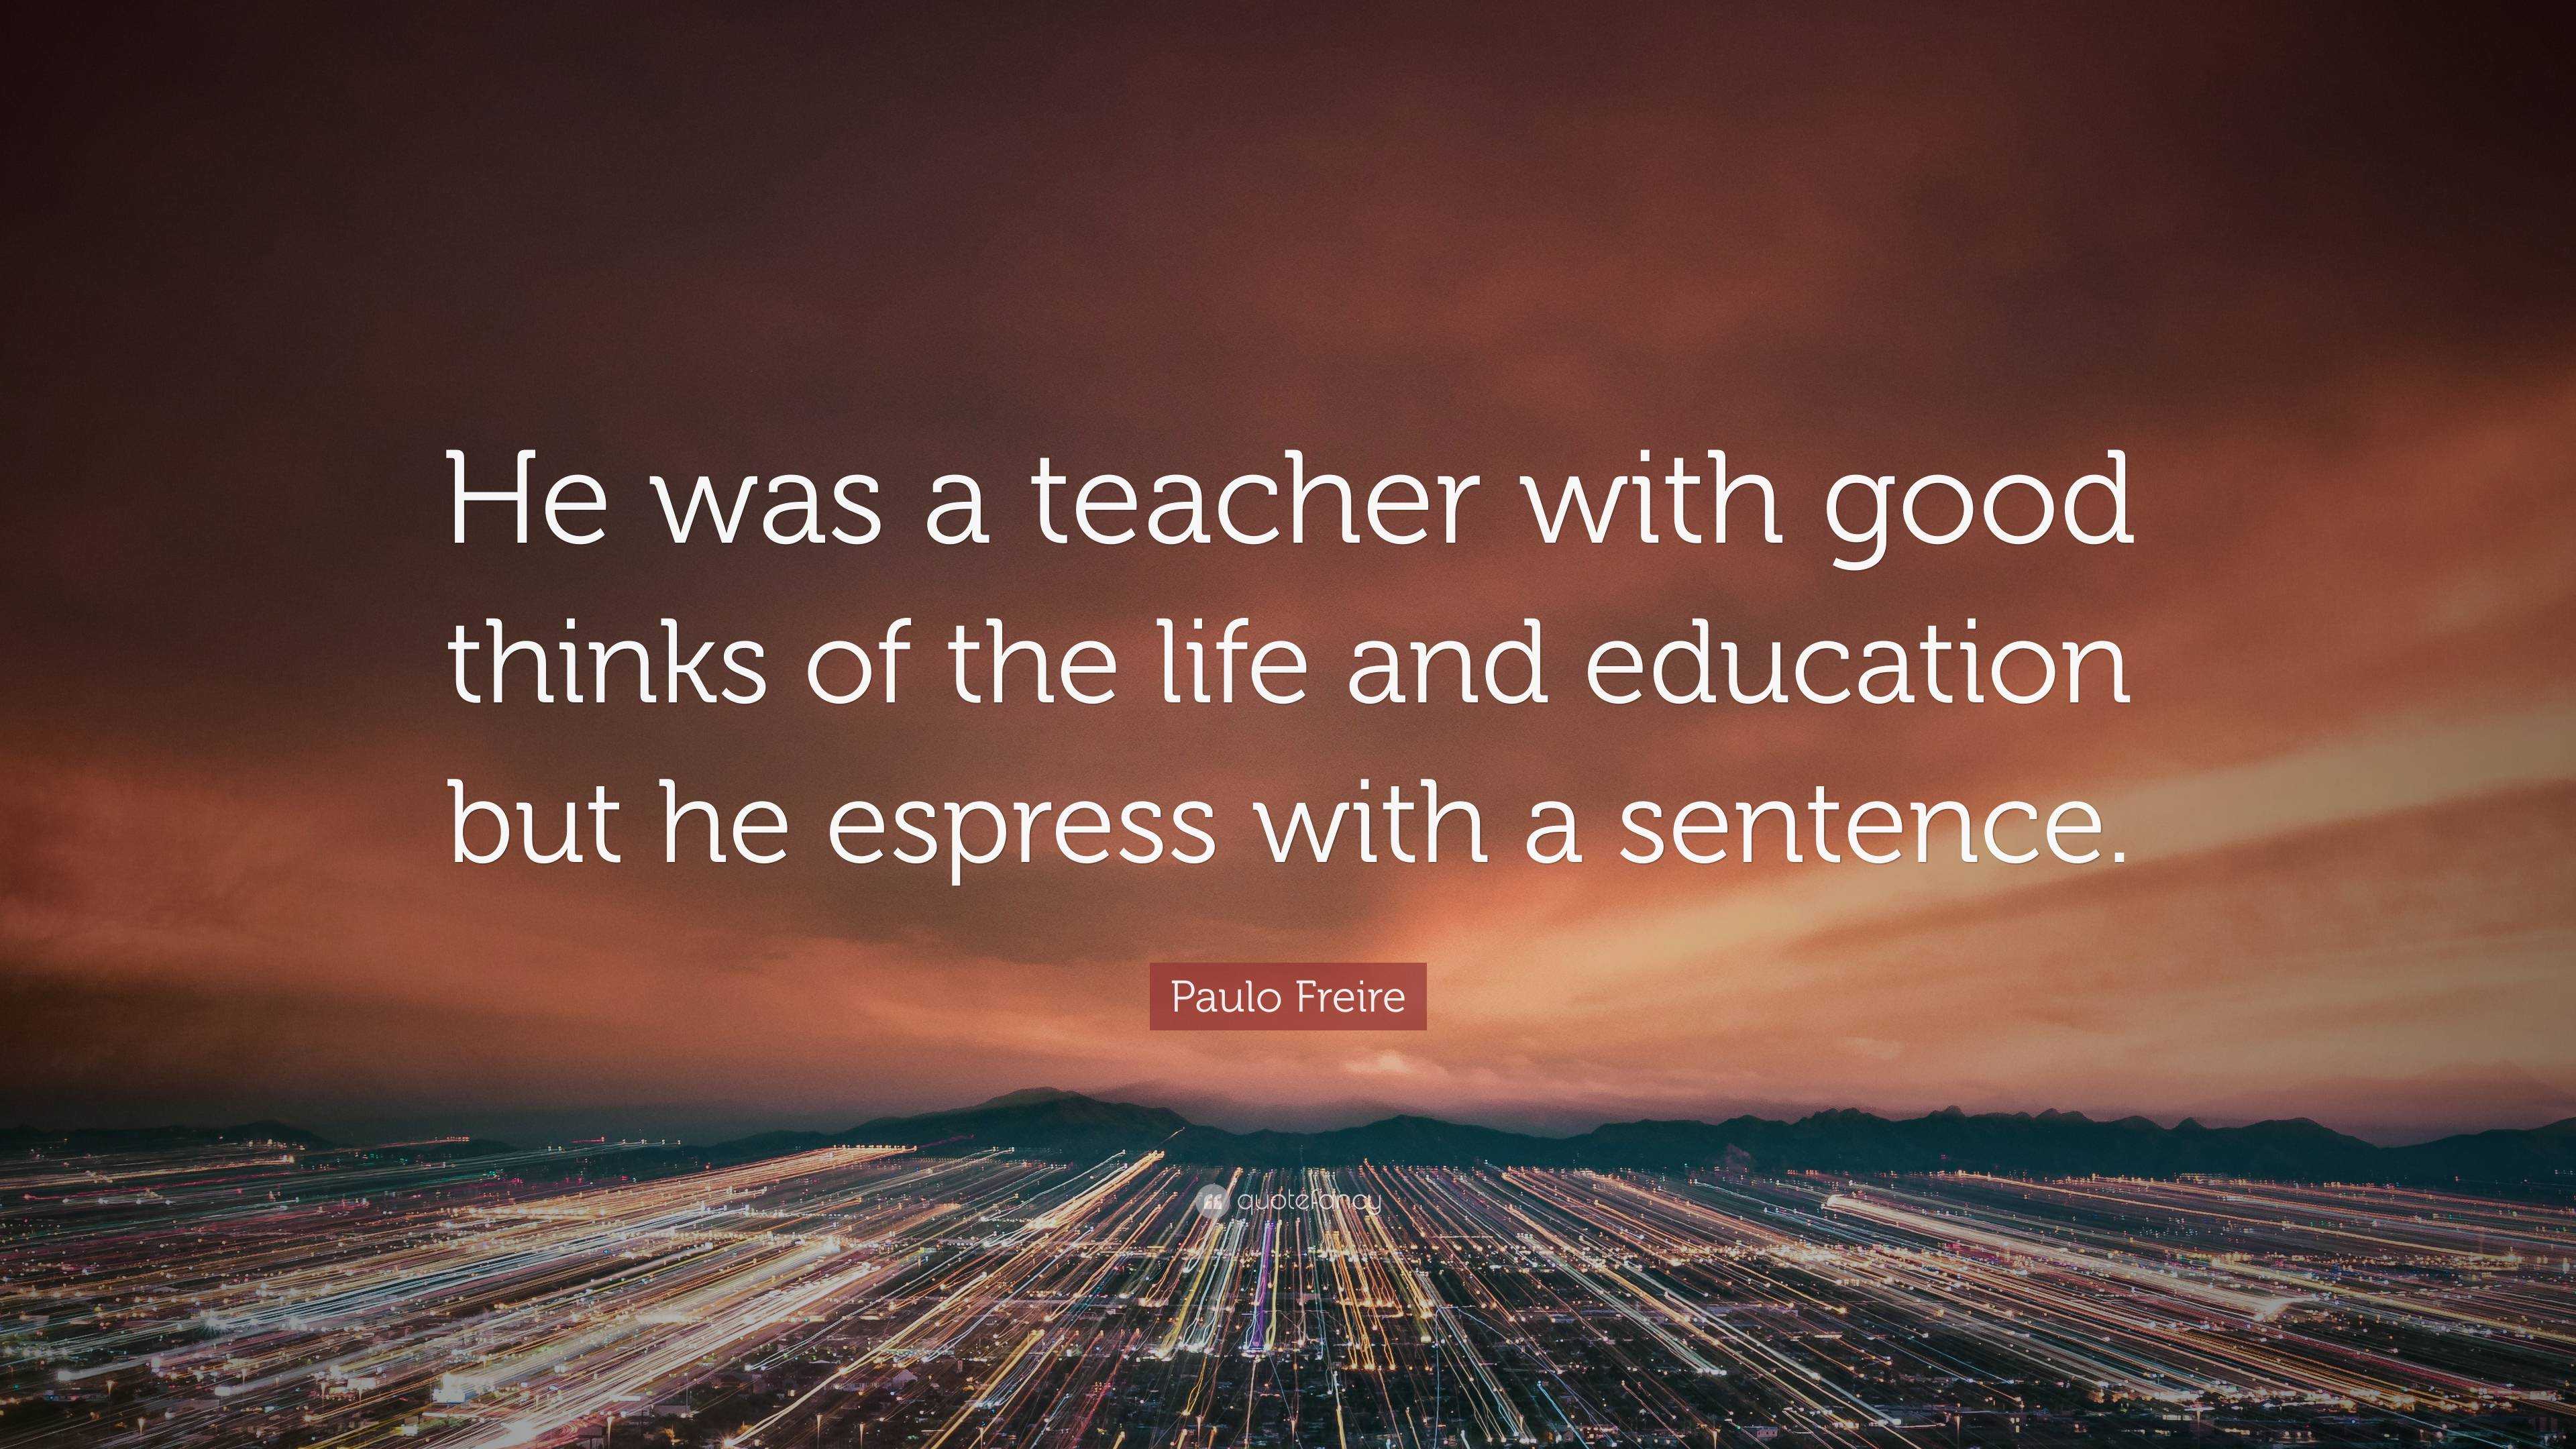 Paulo Freire Quote: “He was a teacher with good thinks of the life and ...